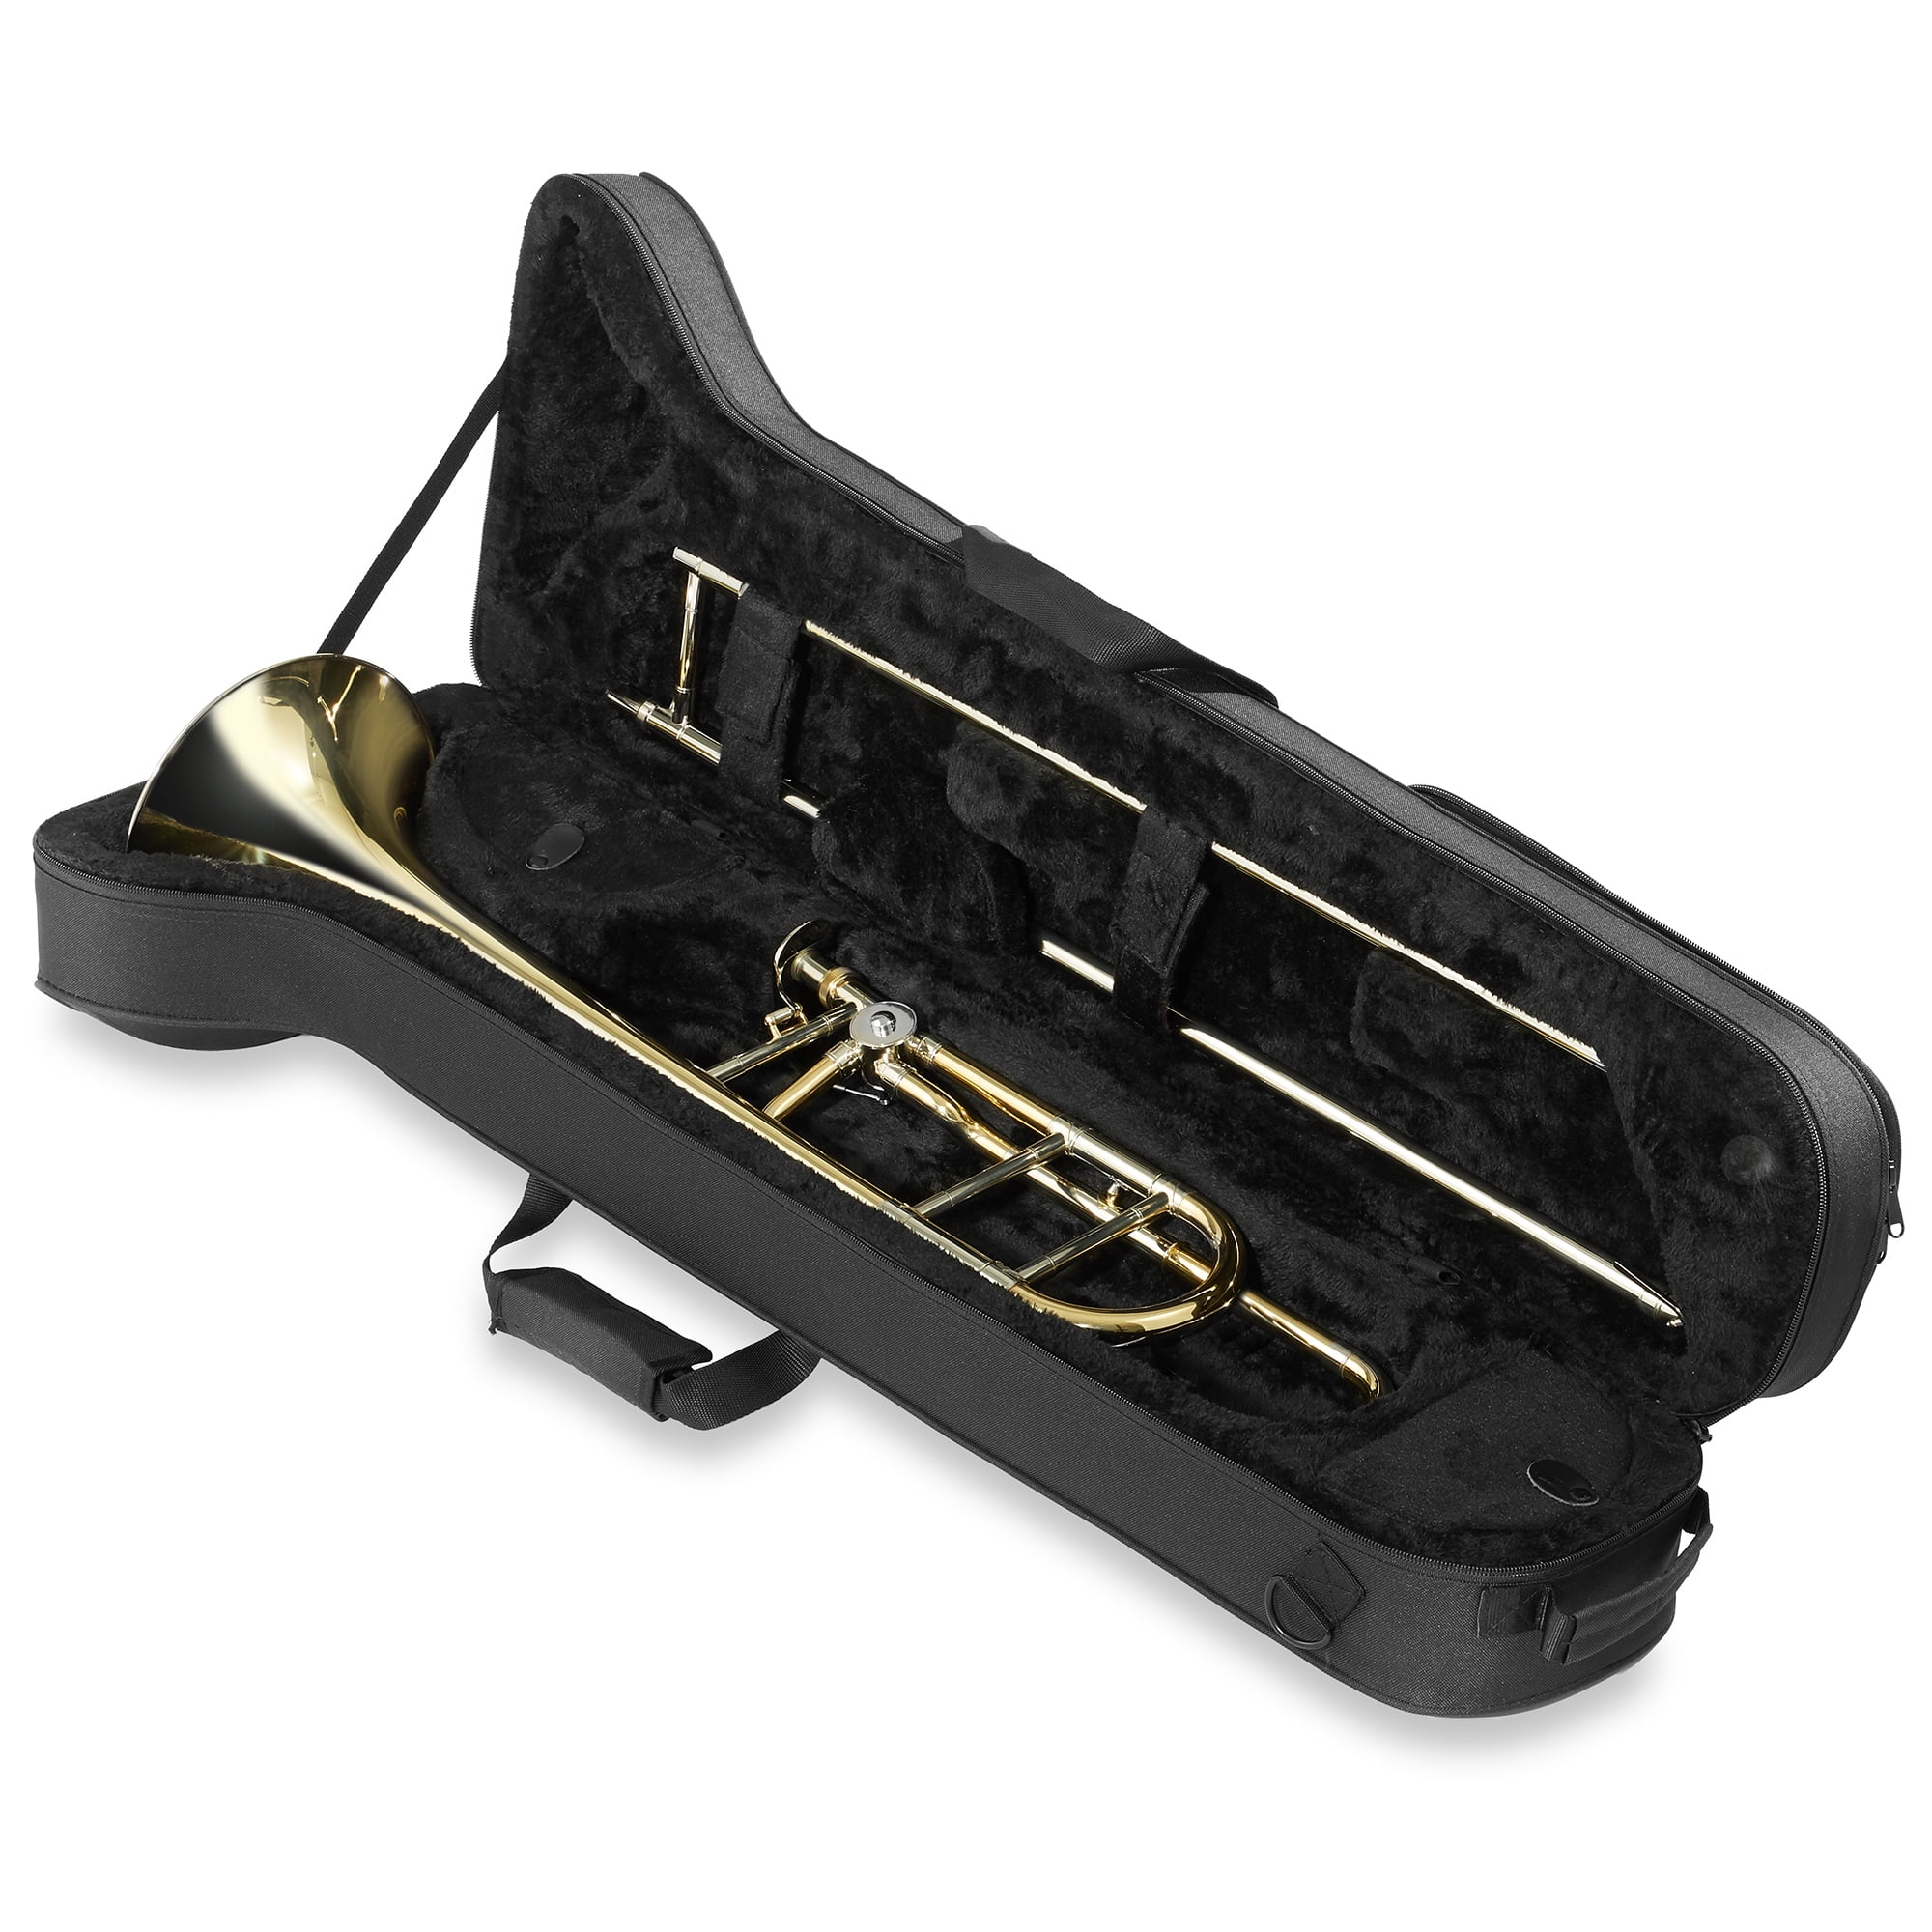 Ashthorpe Bb Tenor Trombone with F Trigger, Gold Lacquer Finish - Includes  Case, Mouthpiece, Gloves, Cleaning Cloth, Slide Grease